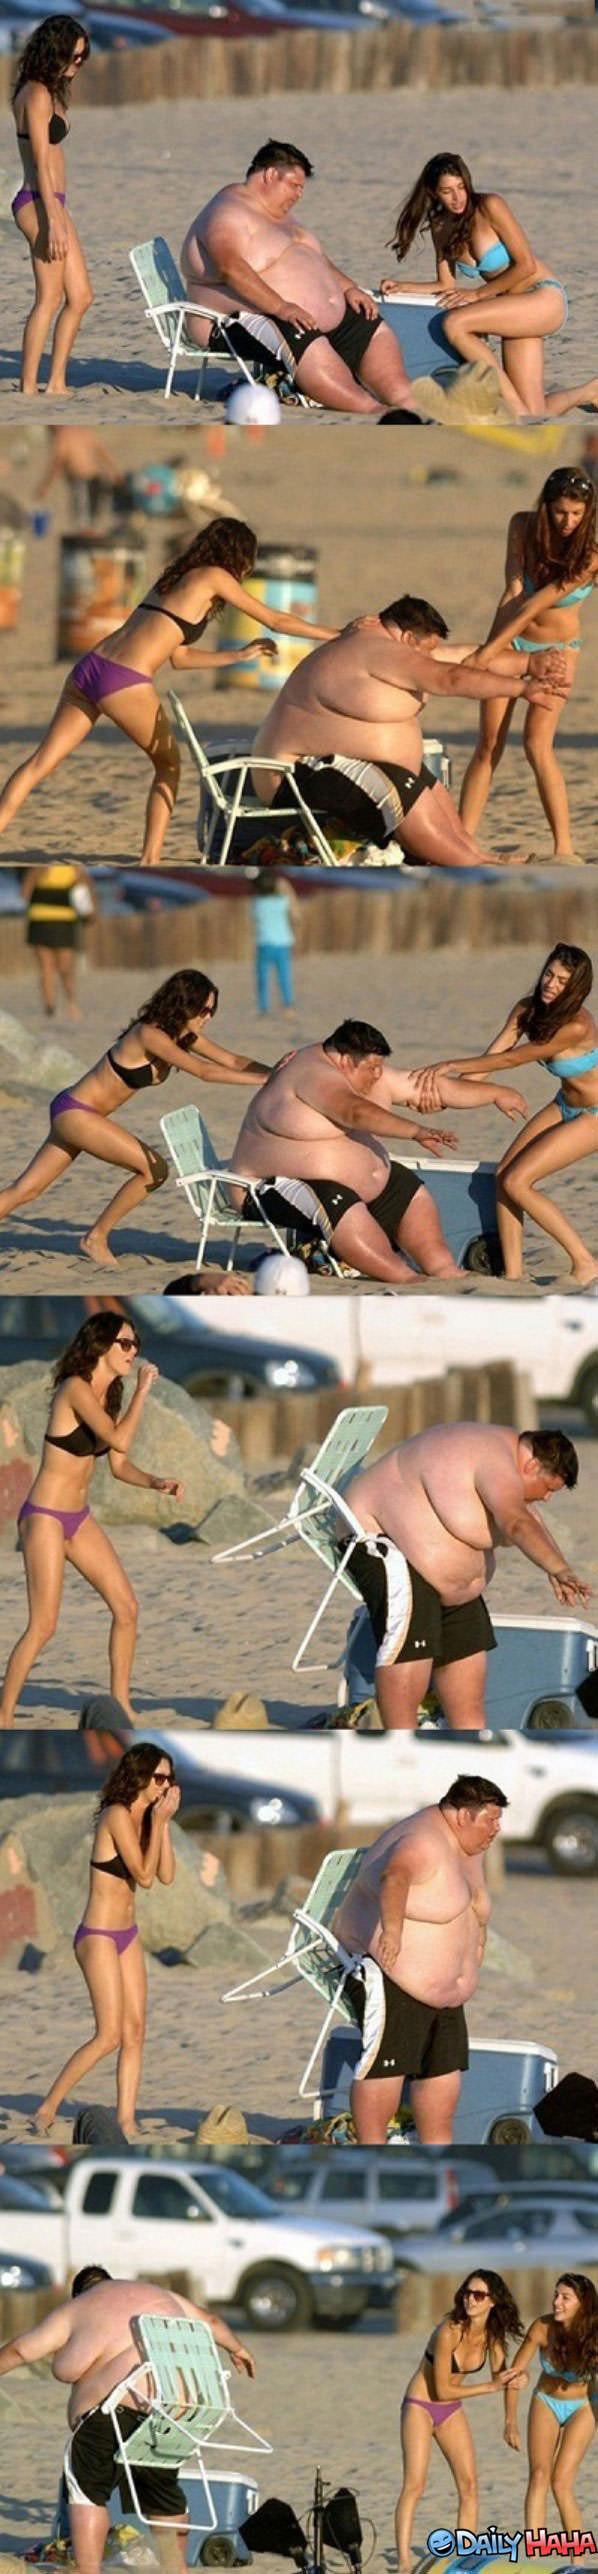 Stuck Fatty funny picture